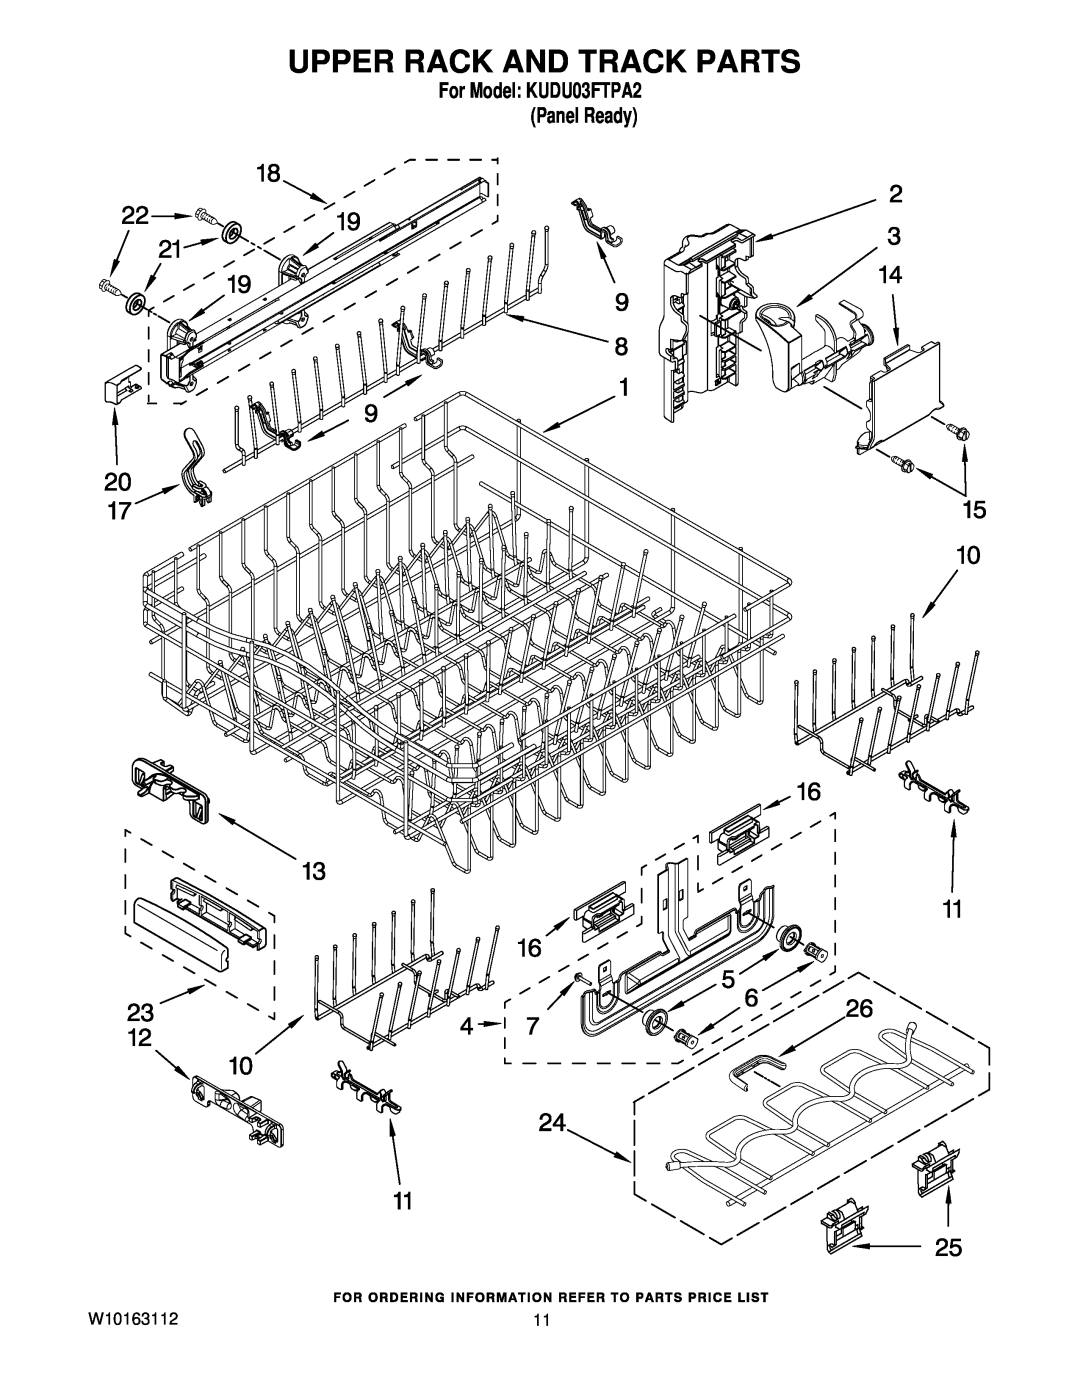 KitchenAid manual Upper Rack And Track Parts, W10163112, For Model KUDU03FTPA2 Panel Ready 